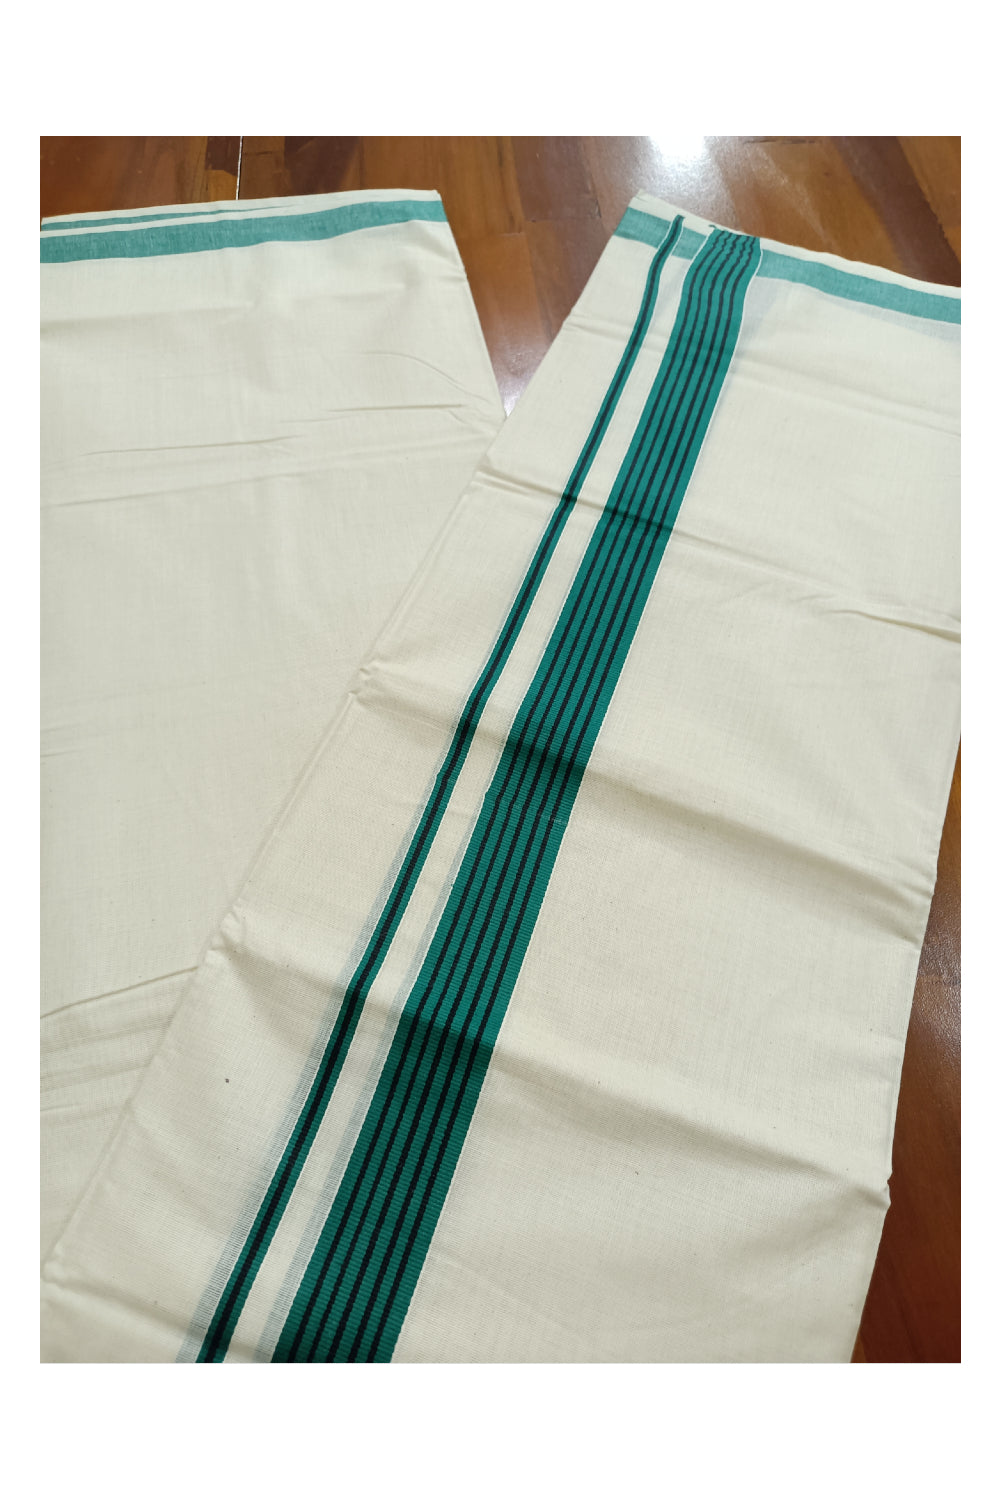 Off White Kerala Double Mundu with Black Lines on Green Border (South Indian Dhoti)